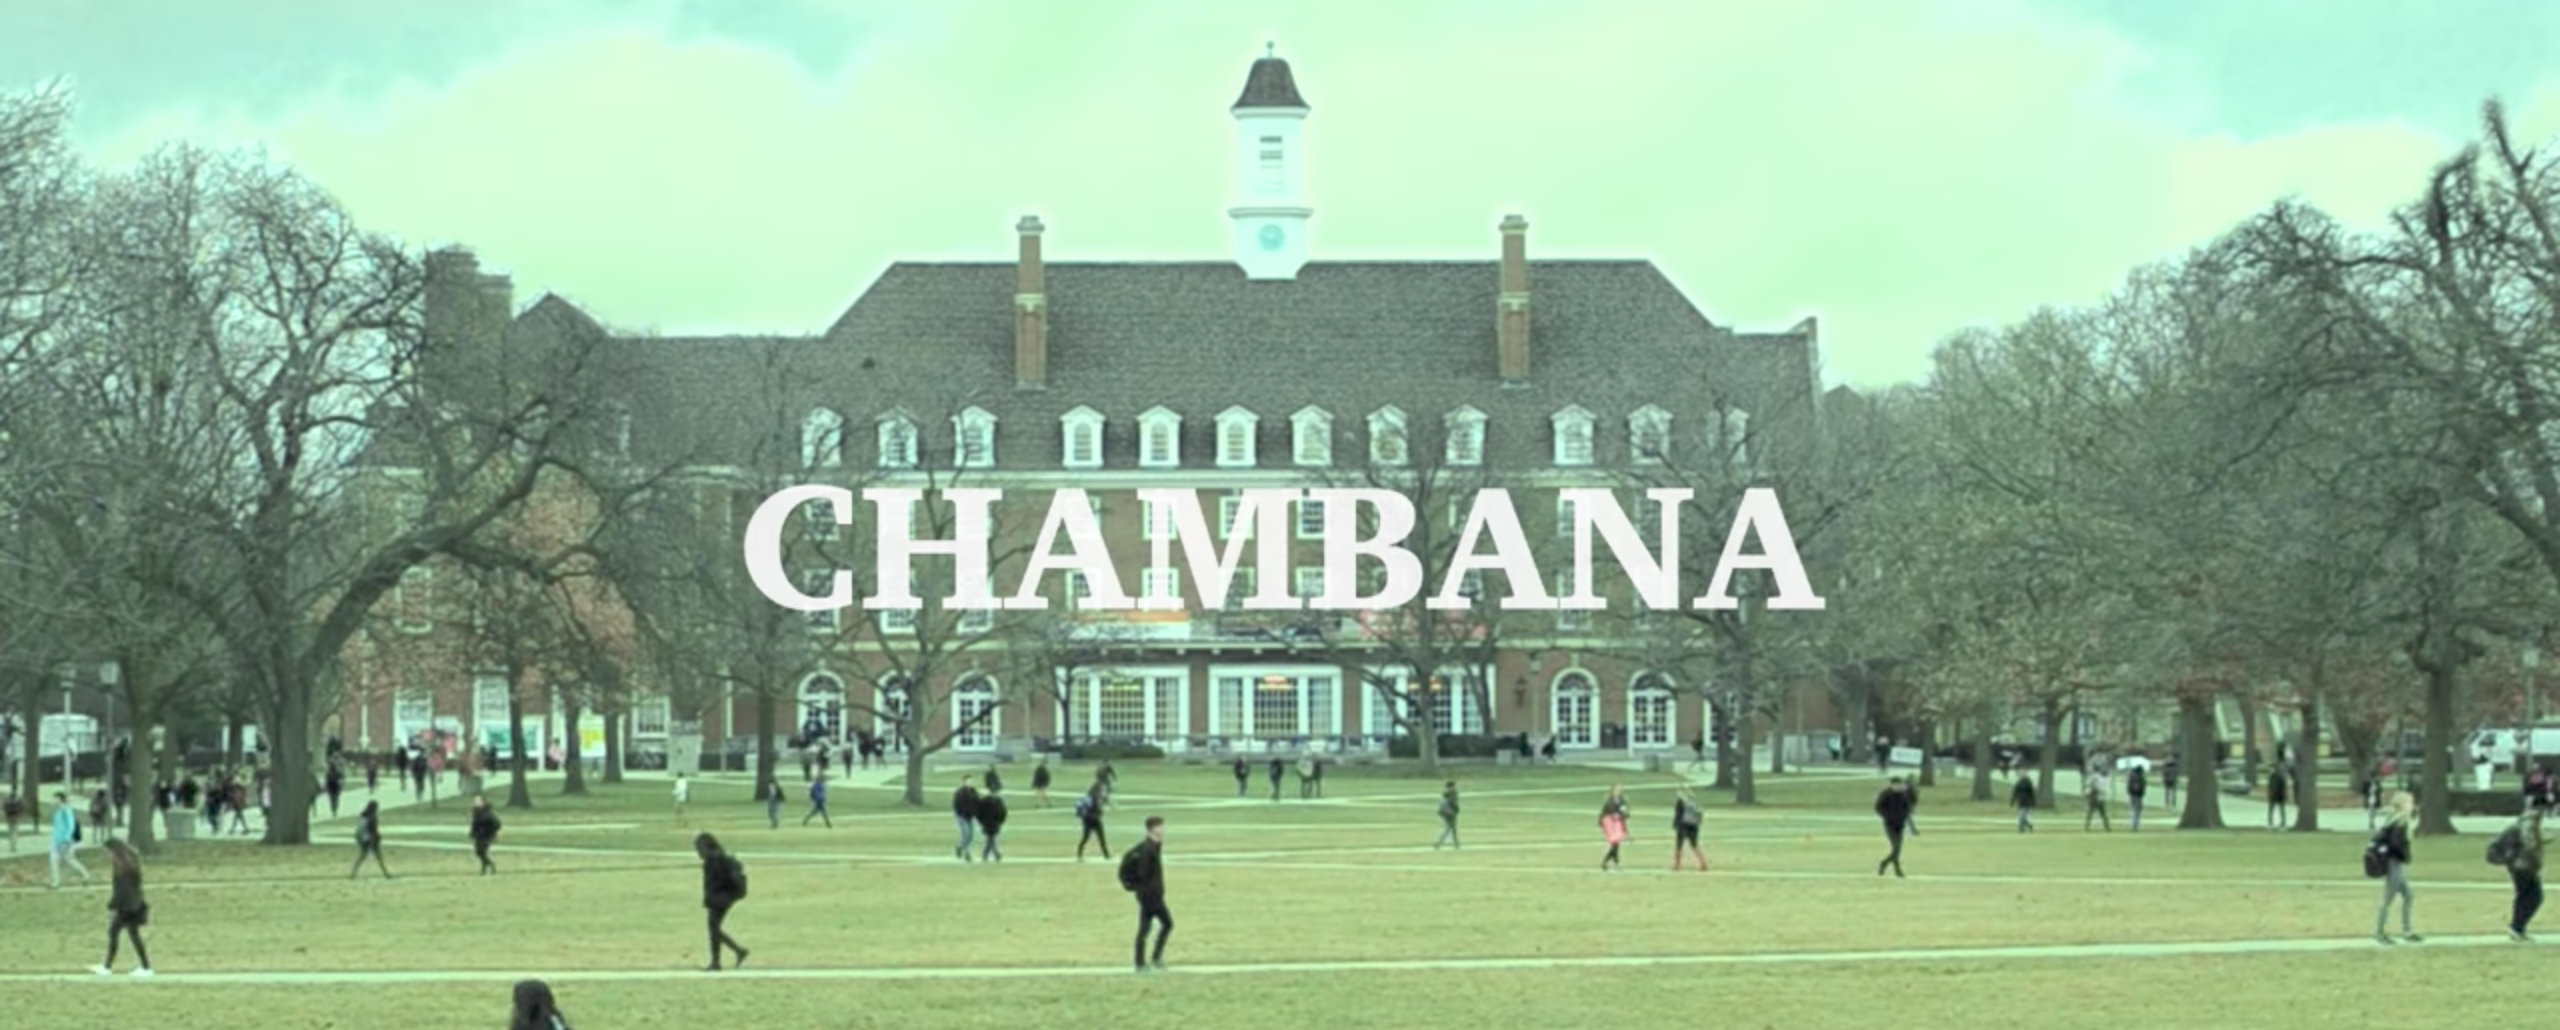 Someone made a shot-for-shot remake of Portlandia‘s opening with a Chambana theme